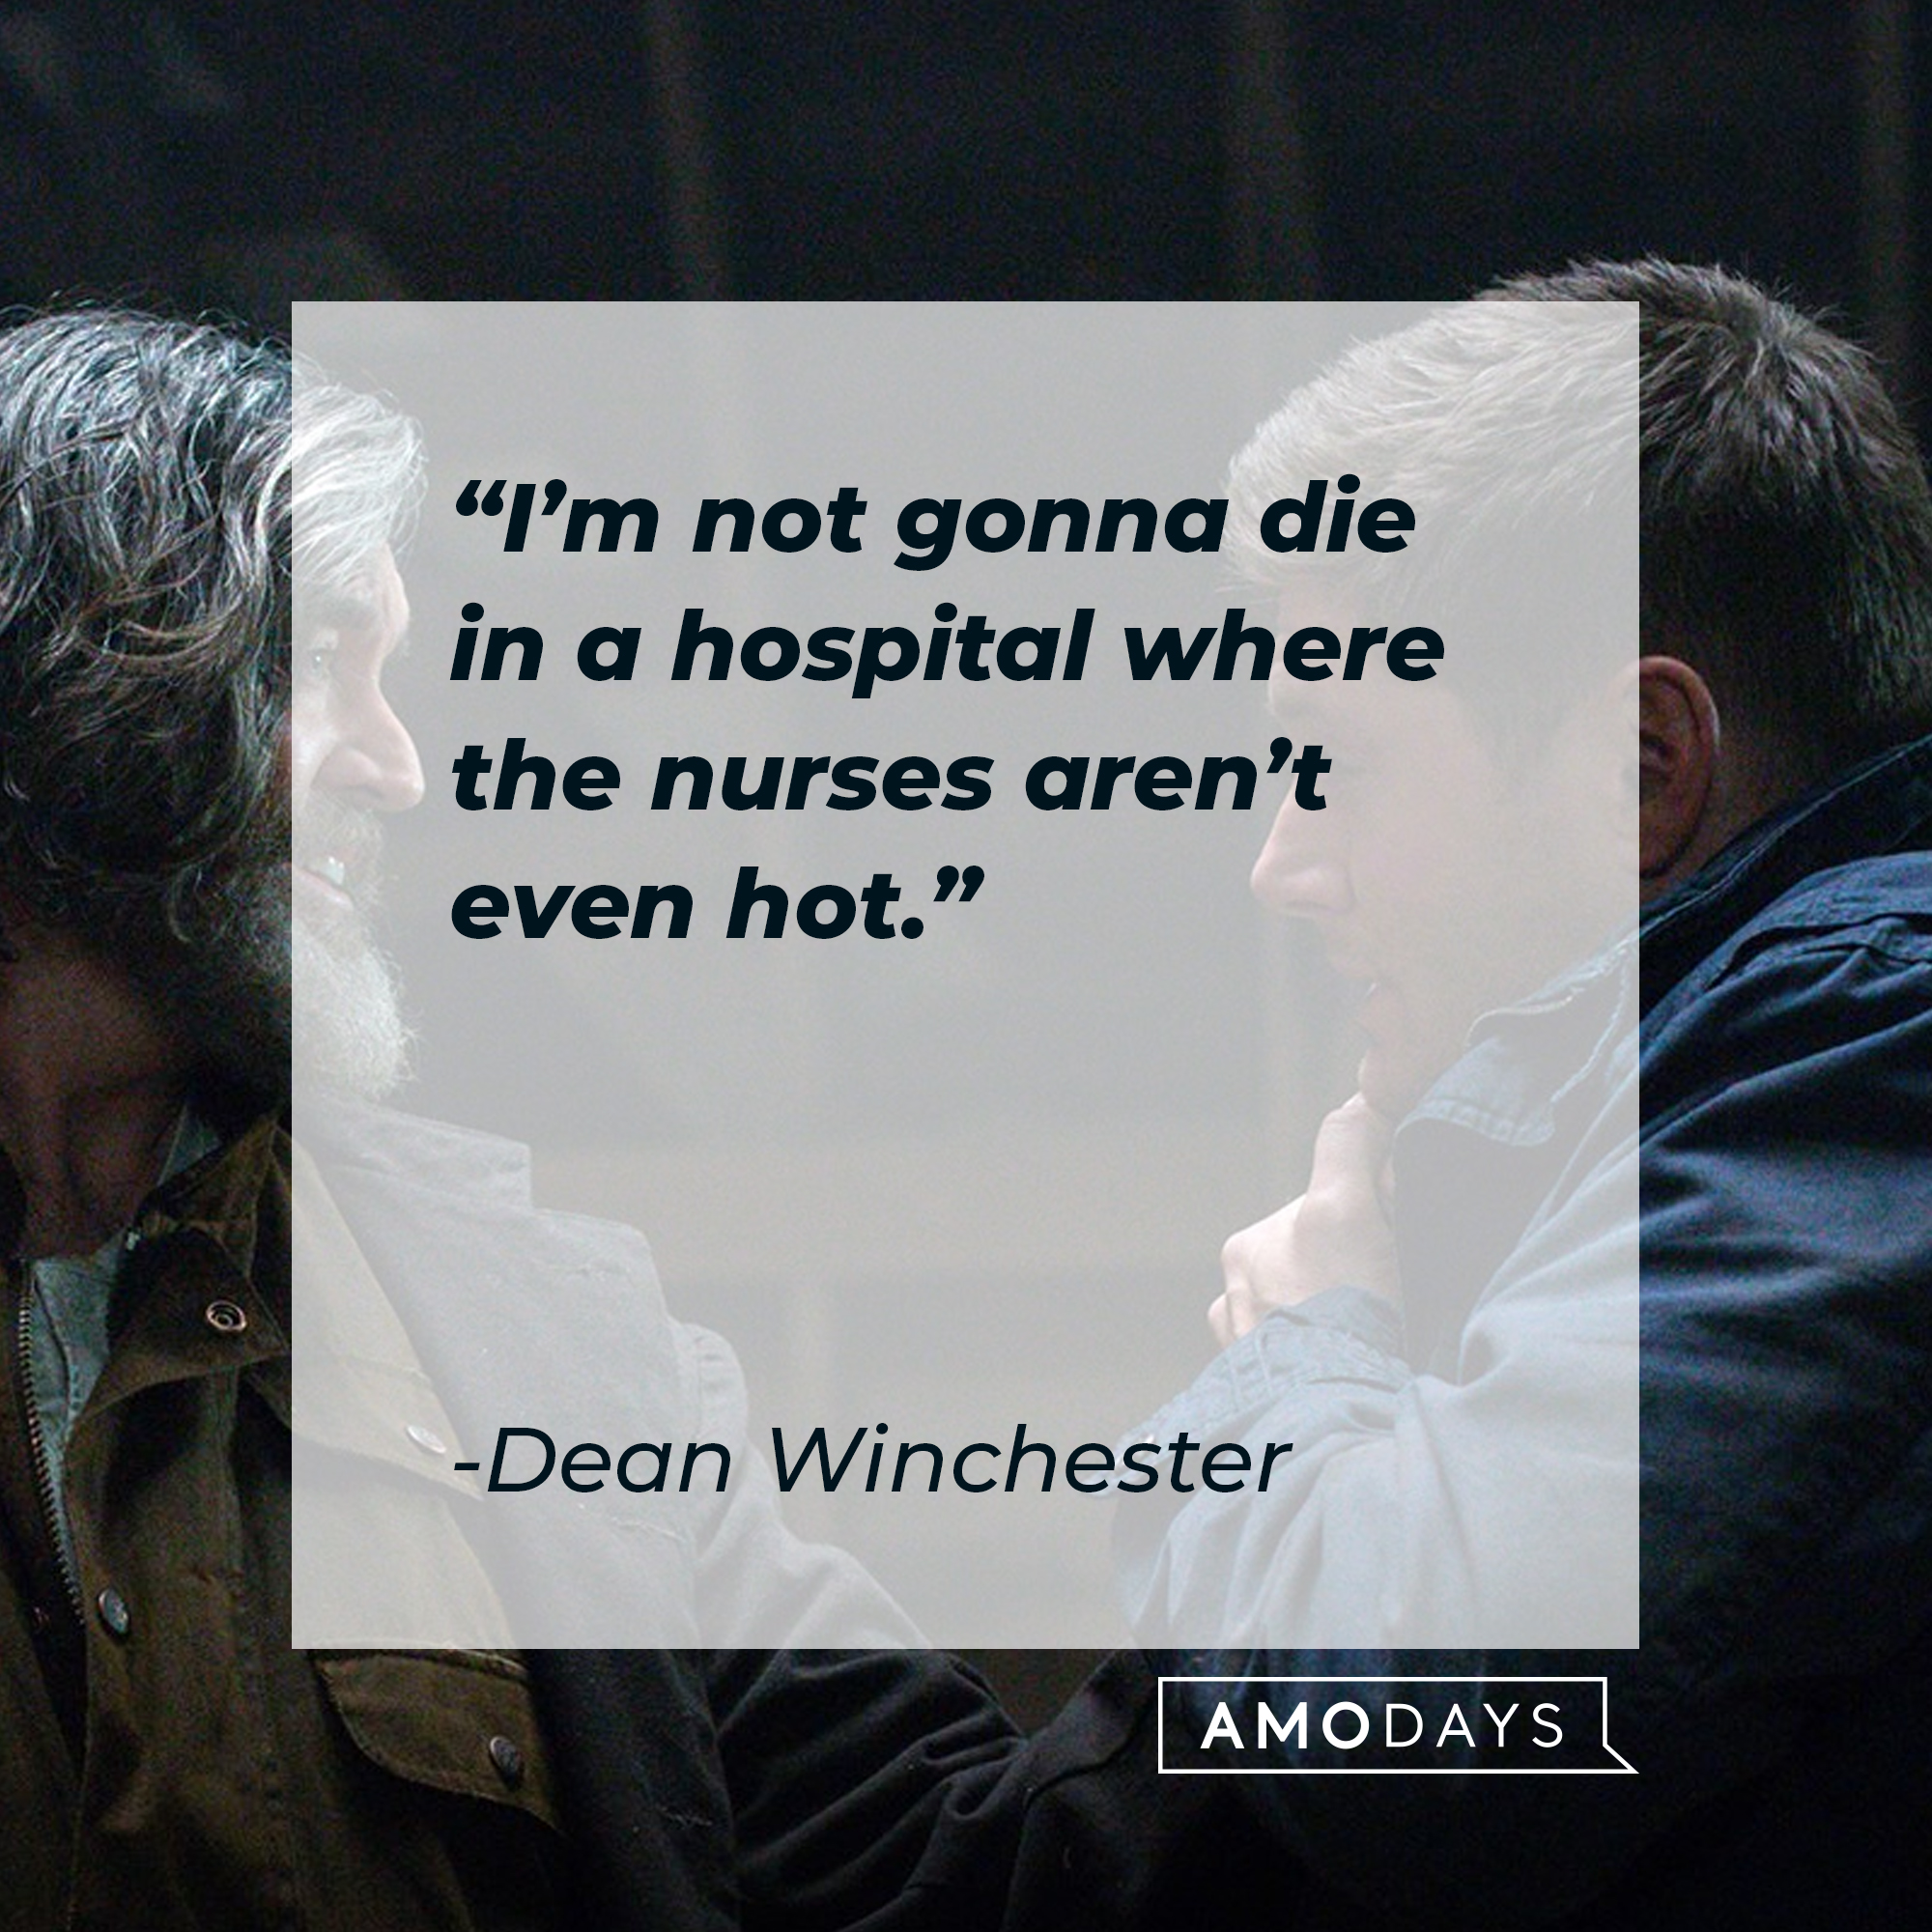 Sam and Dean Winchester, with Dean's quote: “I’m not gonna die in a hospital where the nurses aren’t even hot.” | Source: Facebook.com/Supernatural